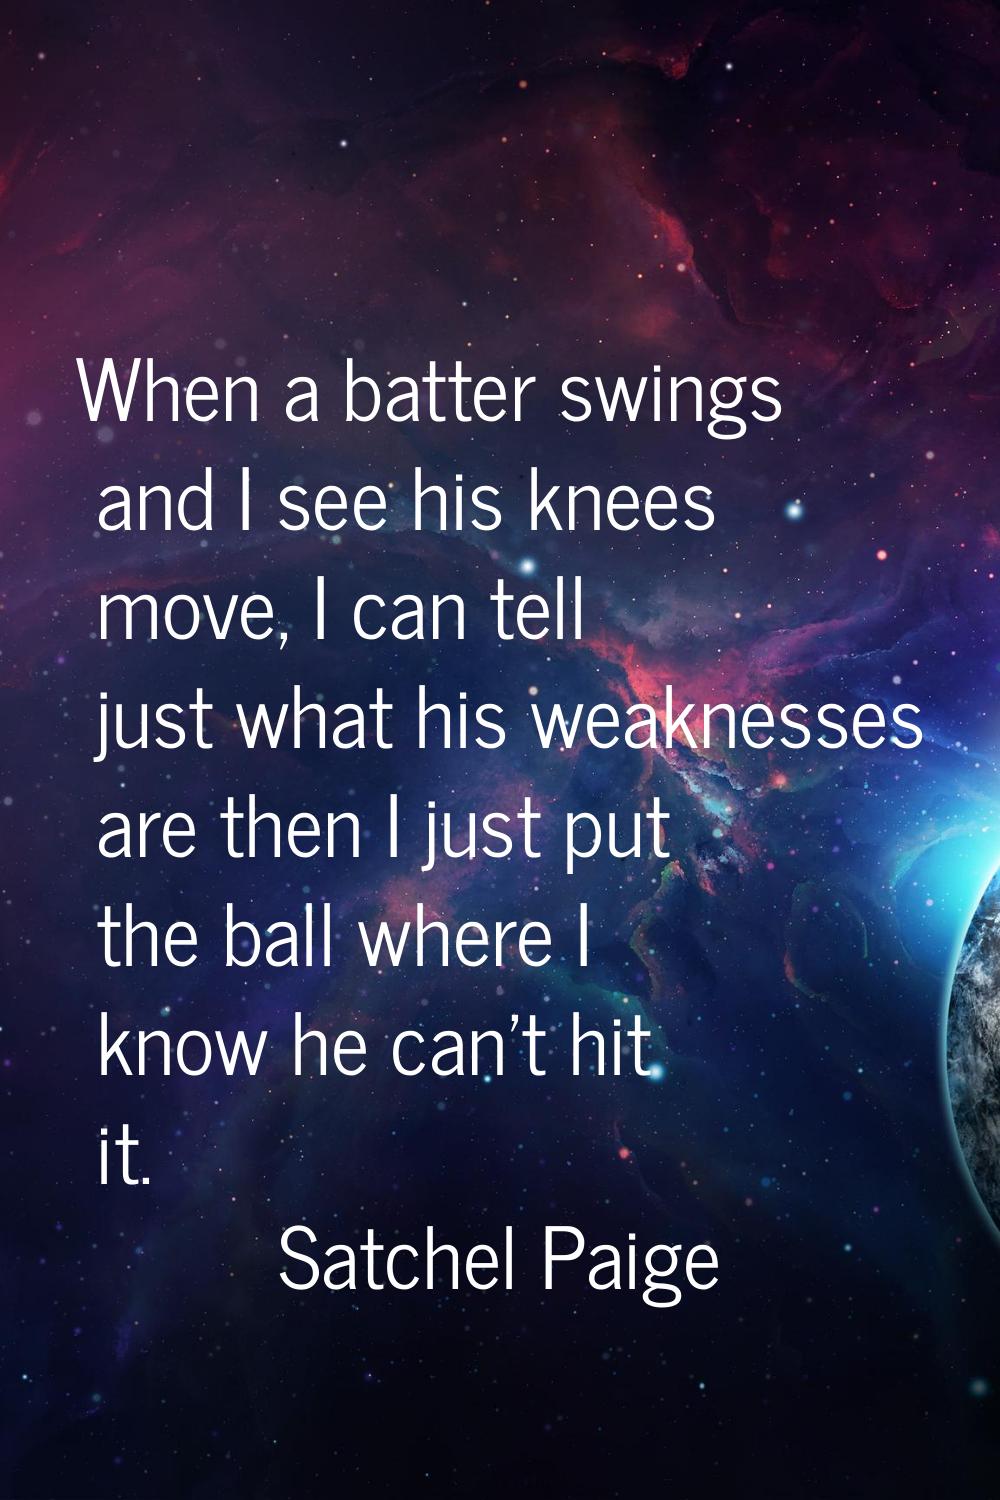 When a batter swings and I see his knees move, I can tell just what his weaknesses are then I just 